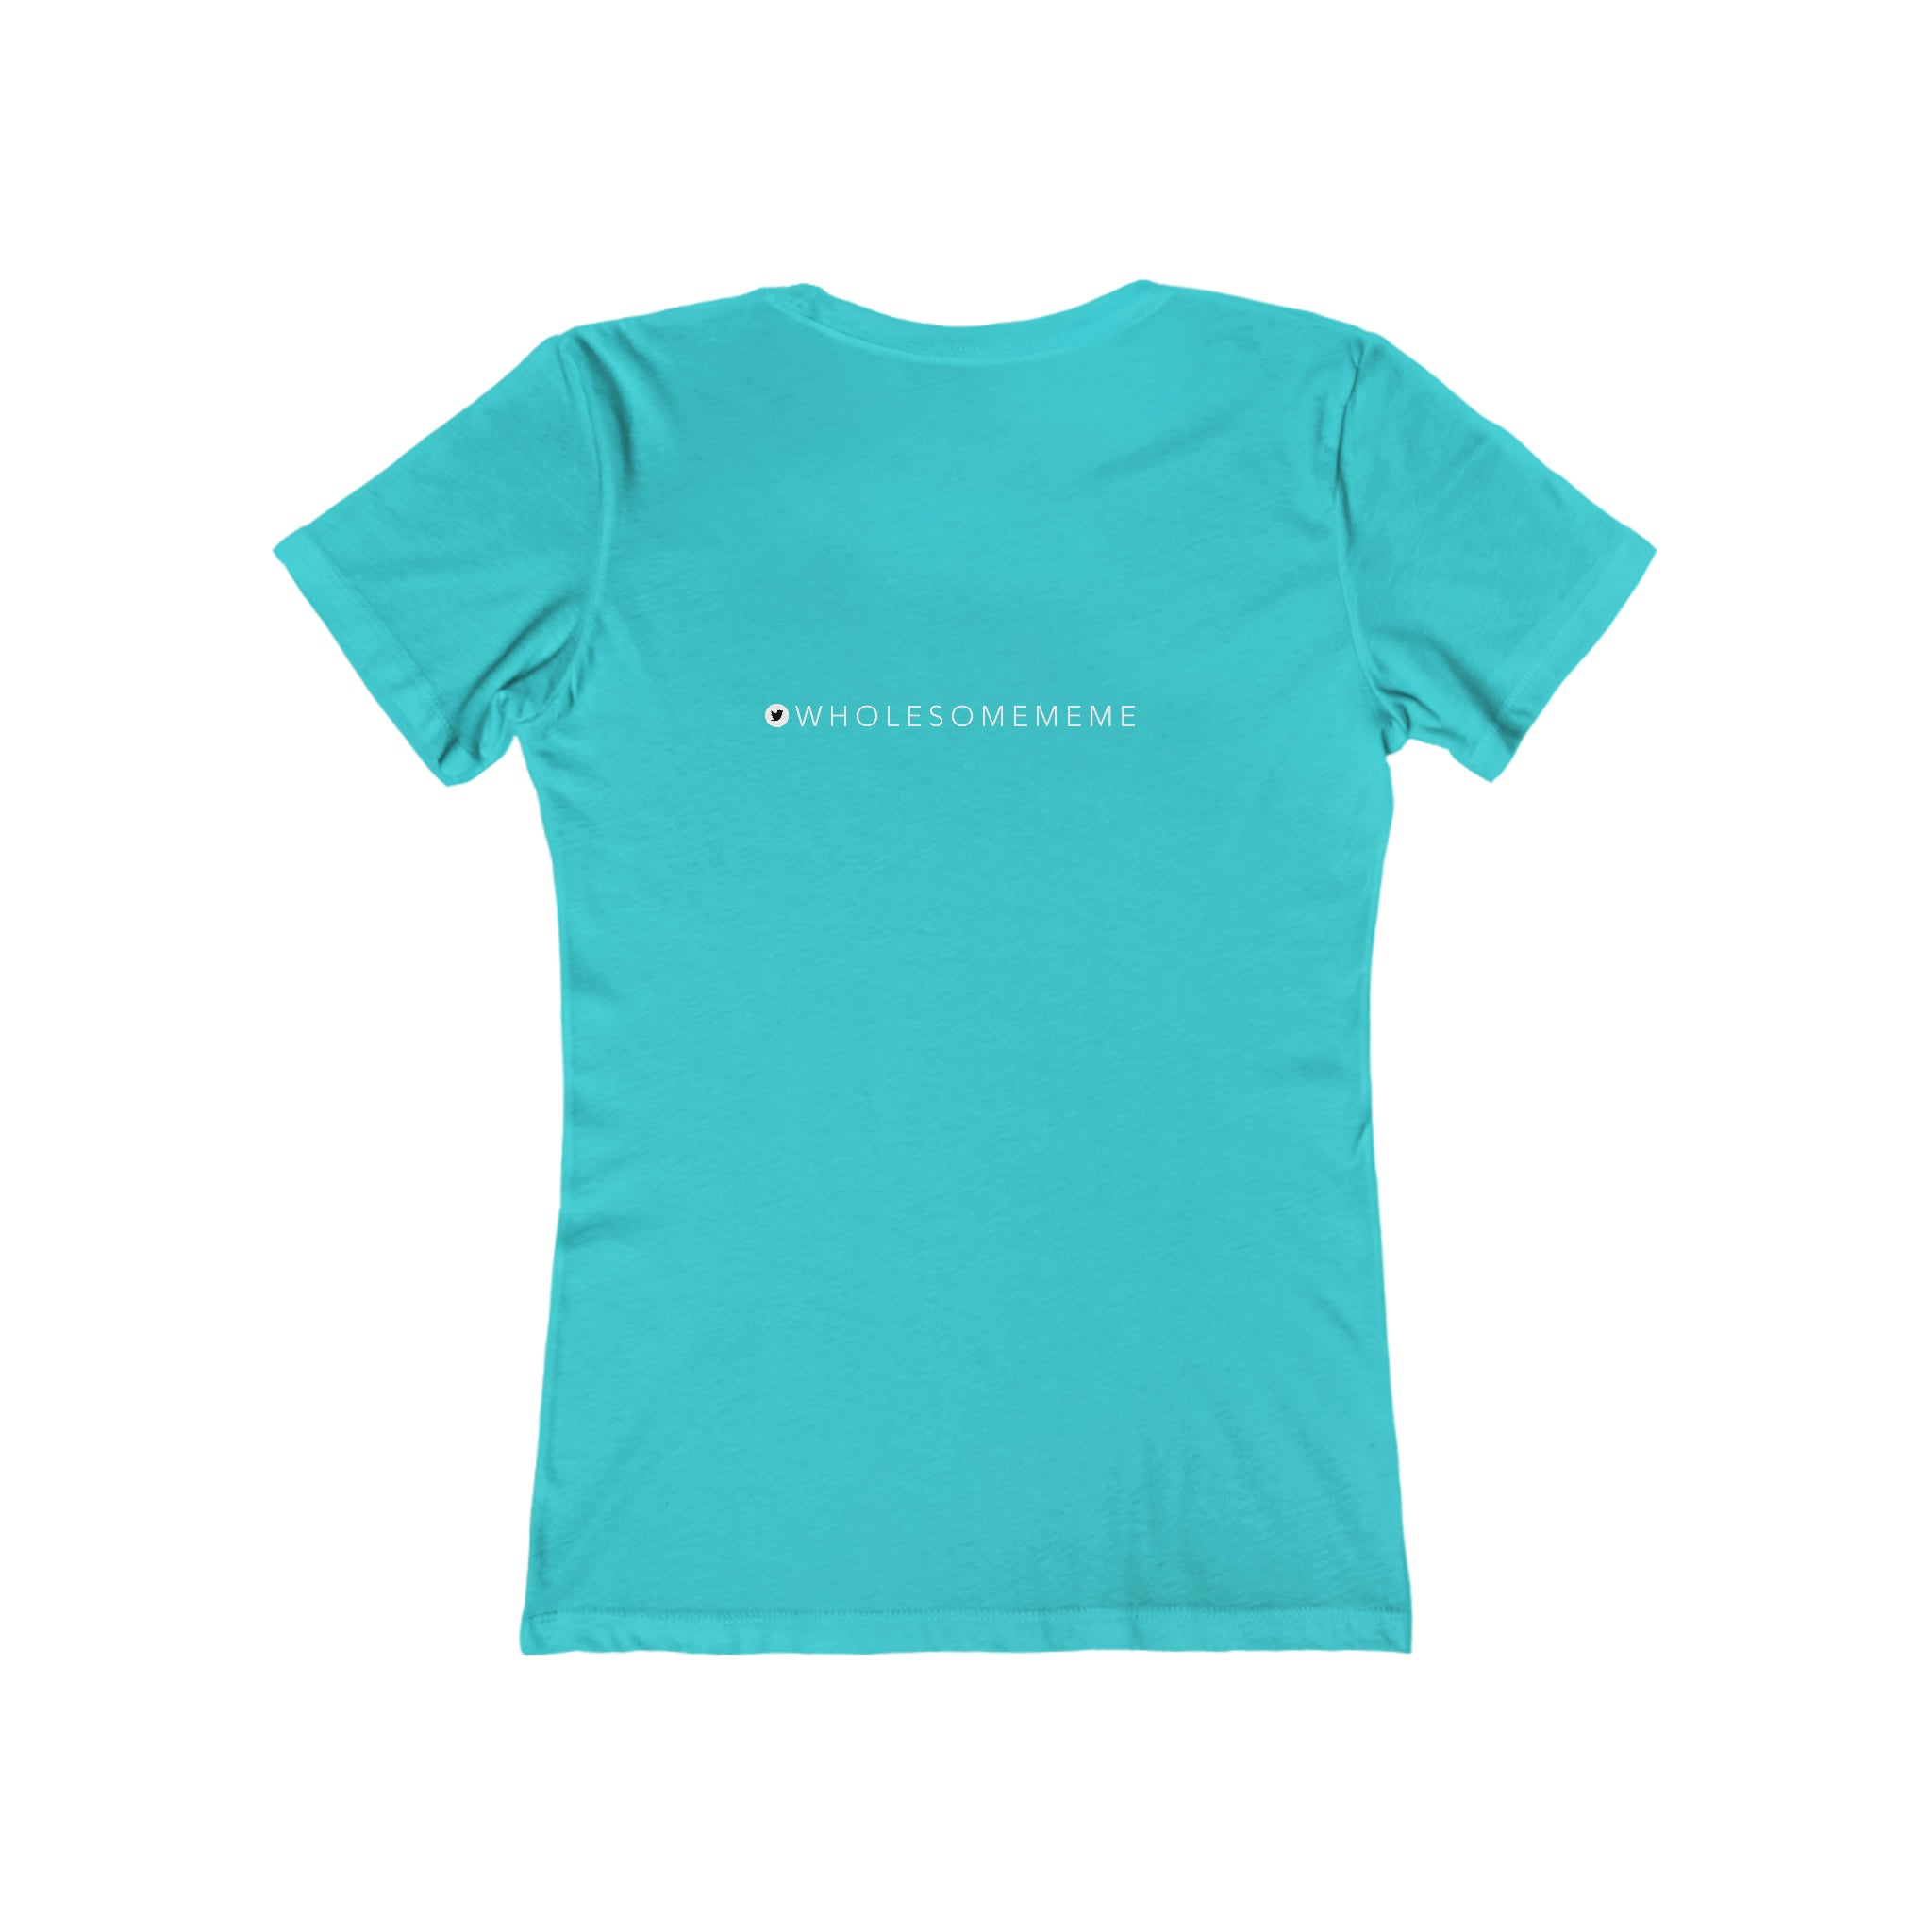 Limited Edition - Be Kind Wholesome : Women's 100% Cotton T-Shirt - Double Sided Shirt